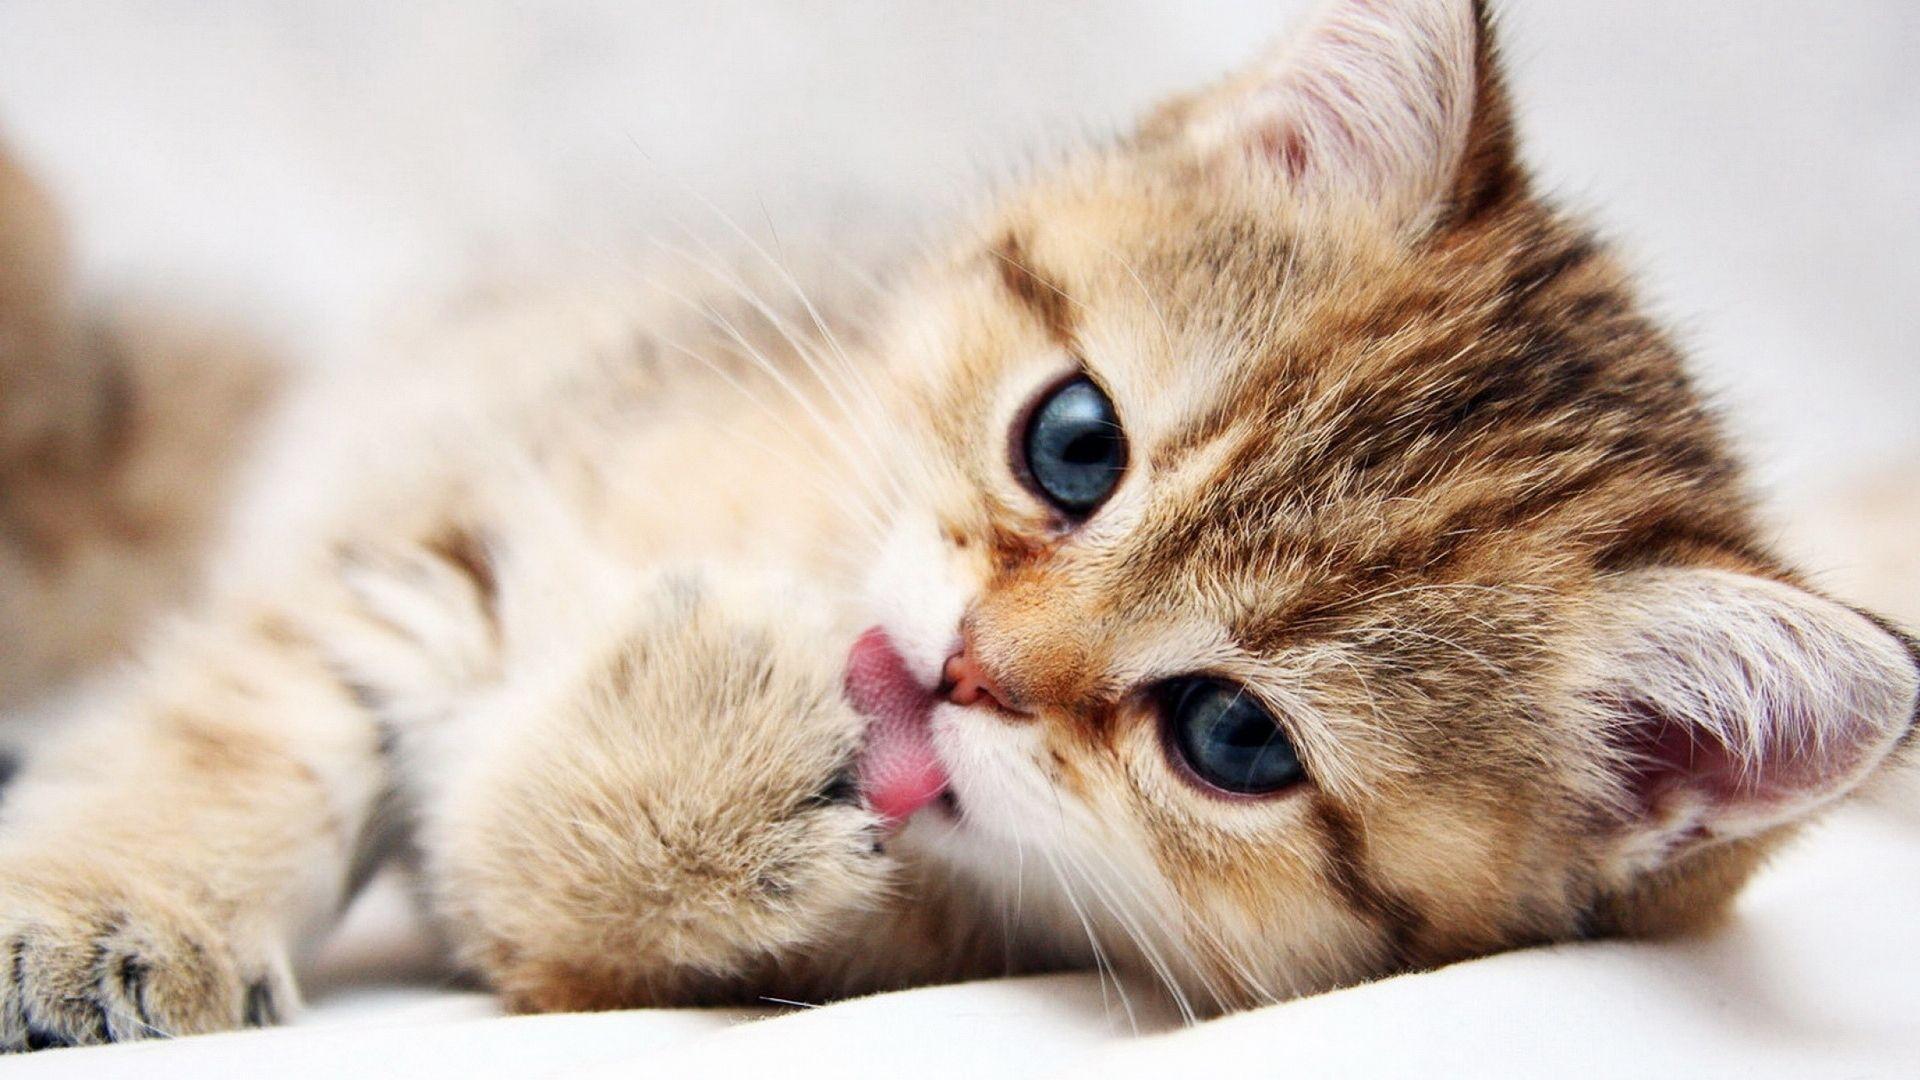 10 Latest Cute Cat Hd Wallpapers 1920X1080 FULL HD 1920×1080 For PC